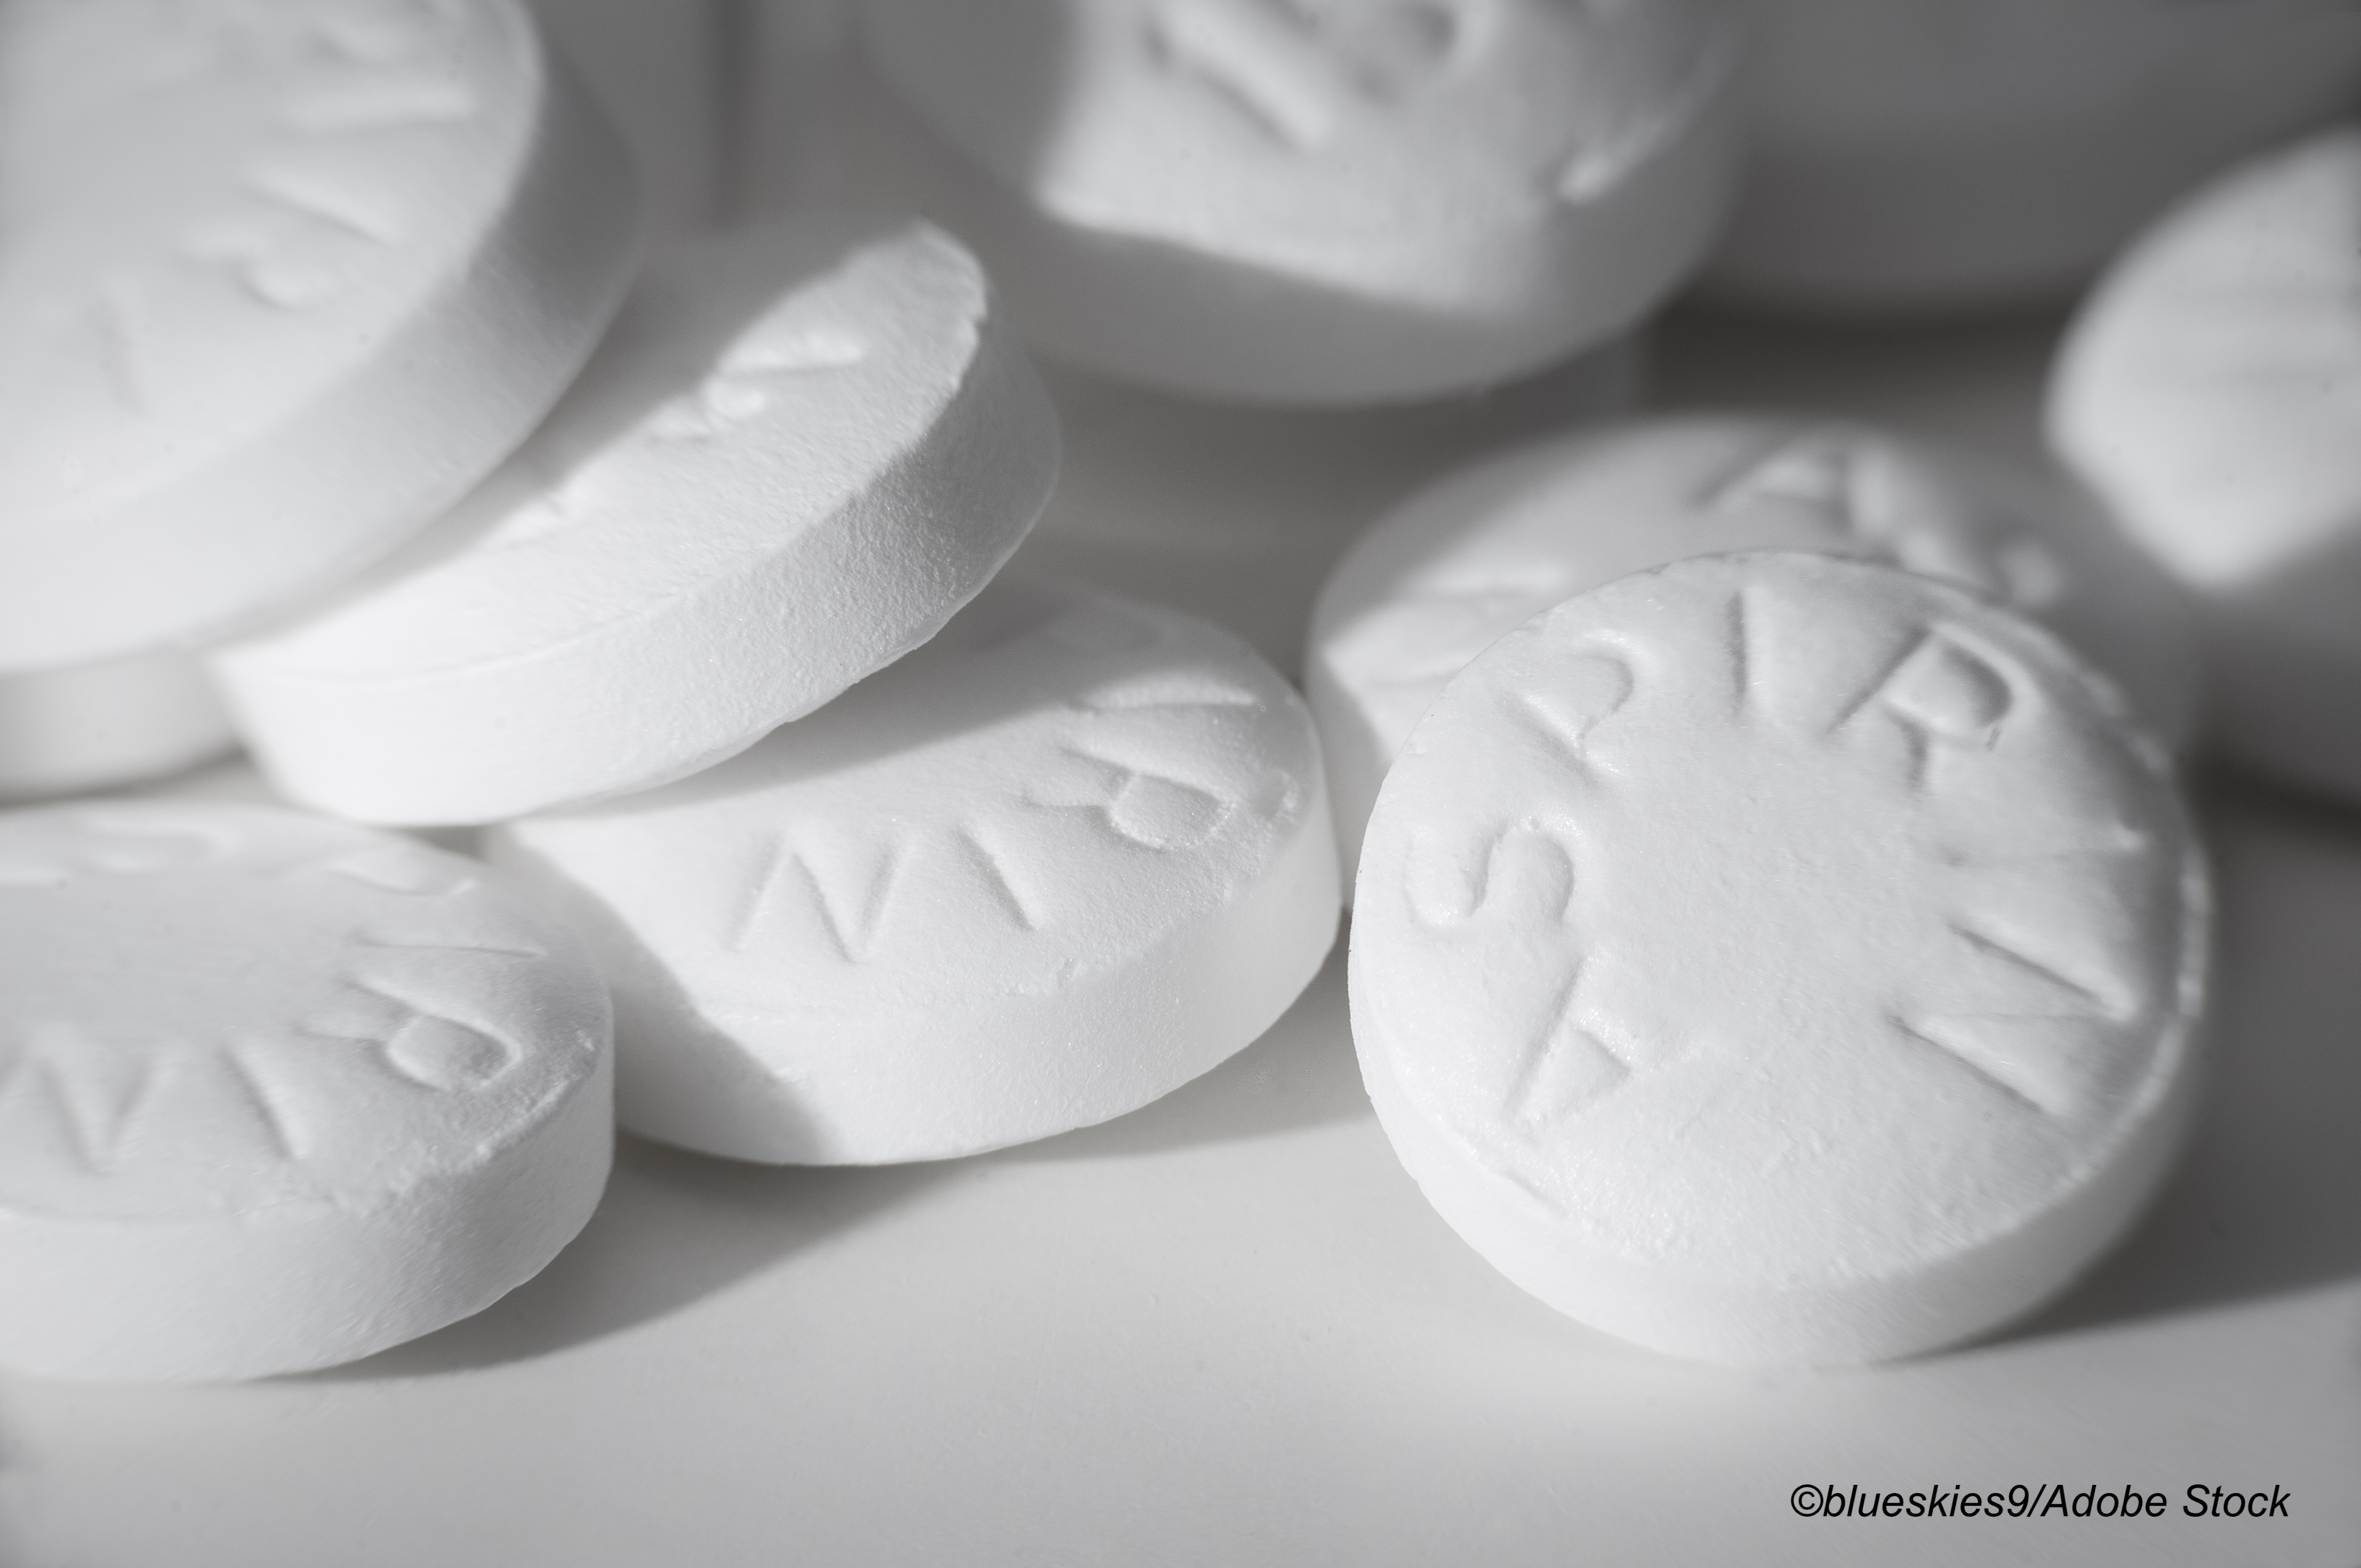 USPSTF Draft Recommendation: No Benefit of Low-Dose Aspirin for Adults 60+